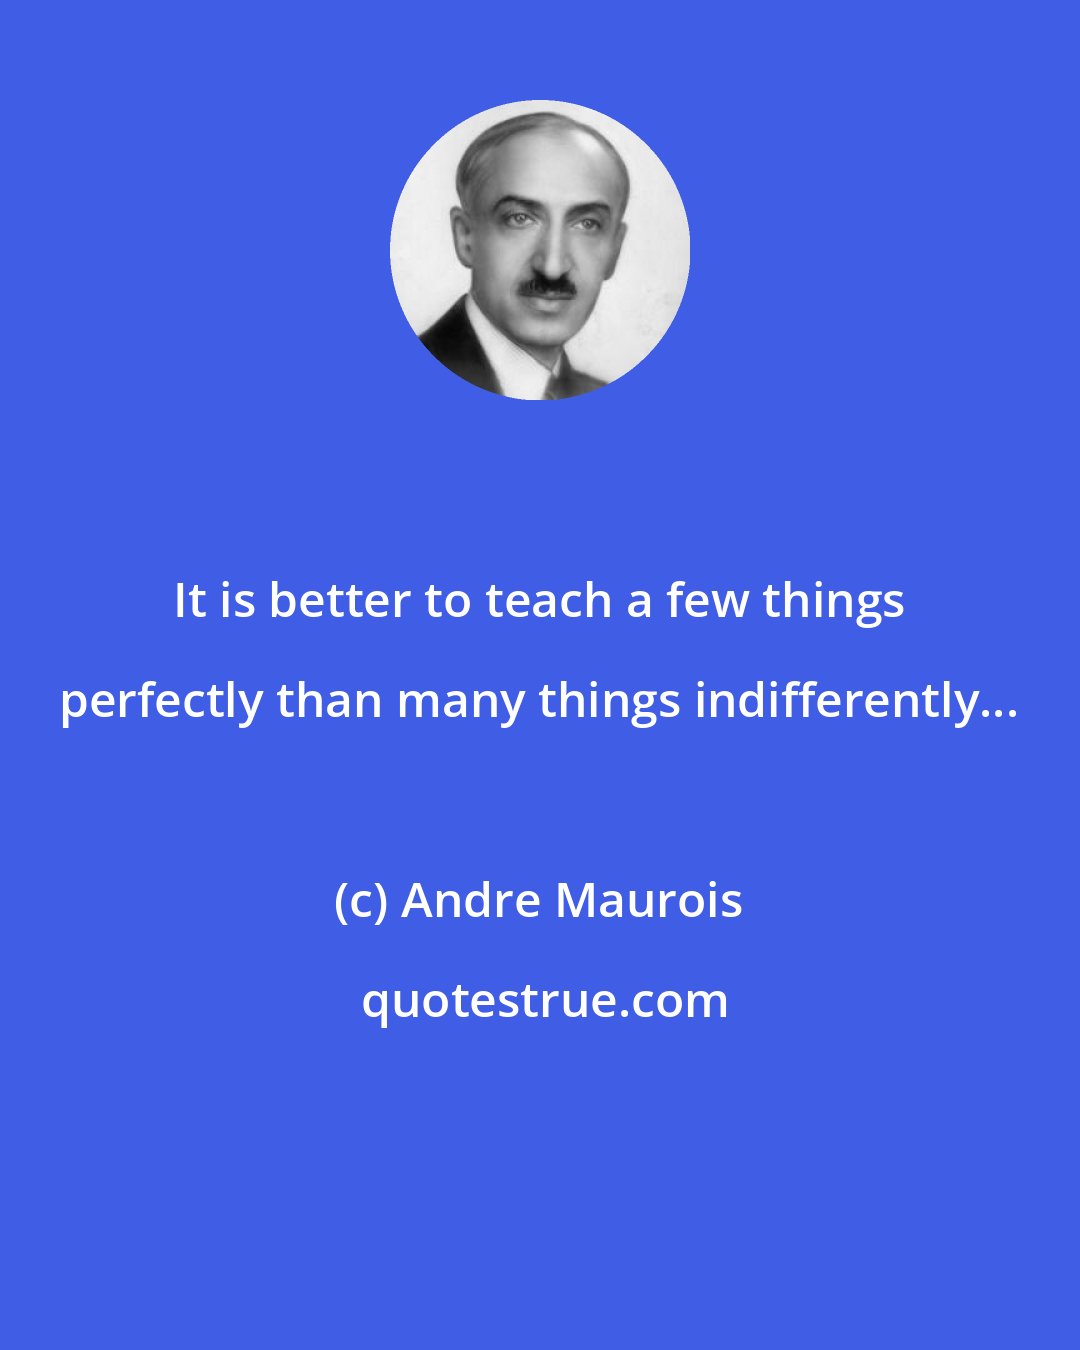 Andre Maurois: It is better to teach a few things perfectly than many things indifferently...